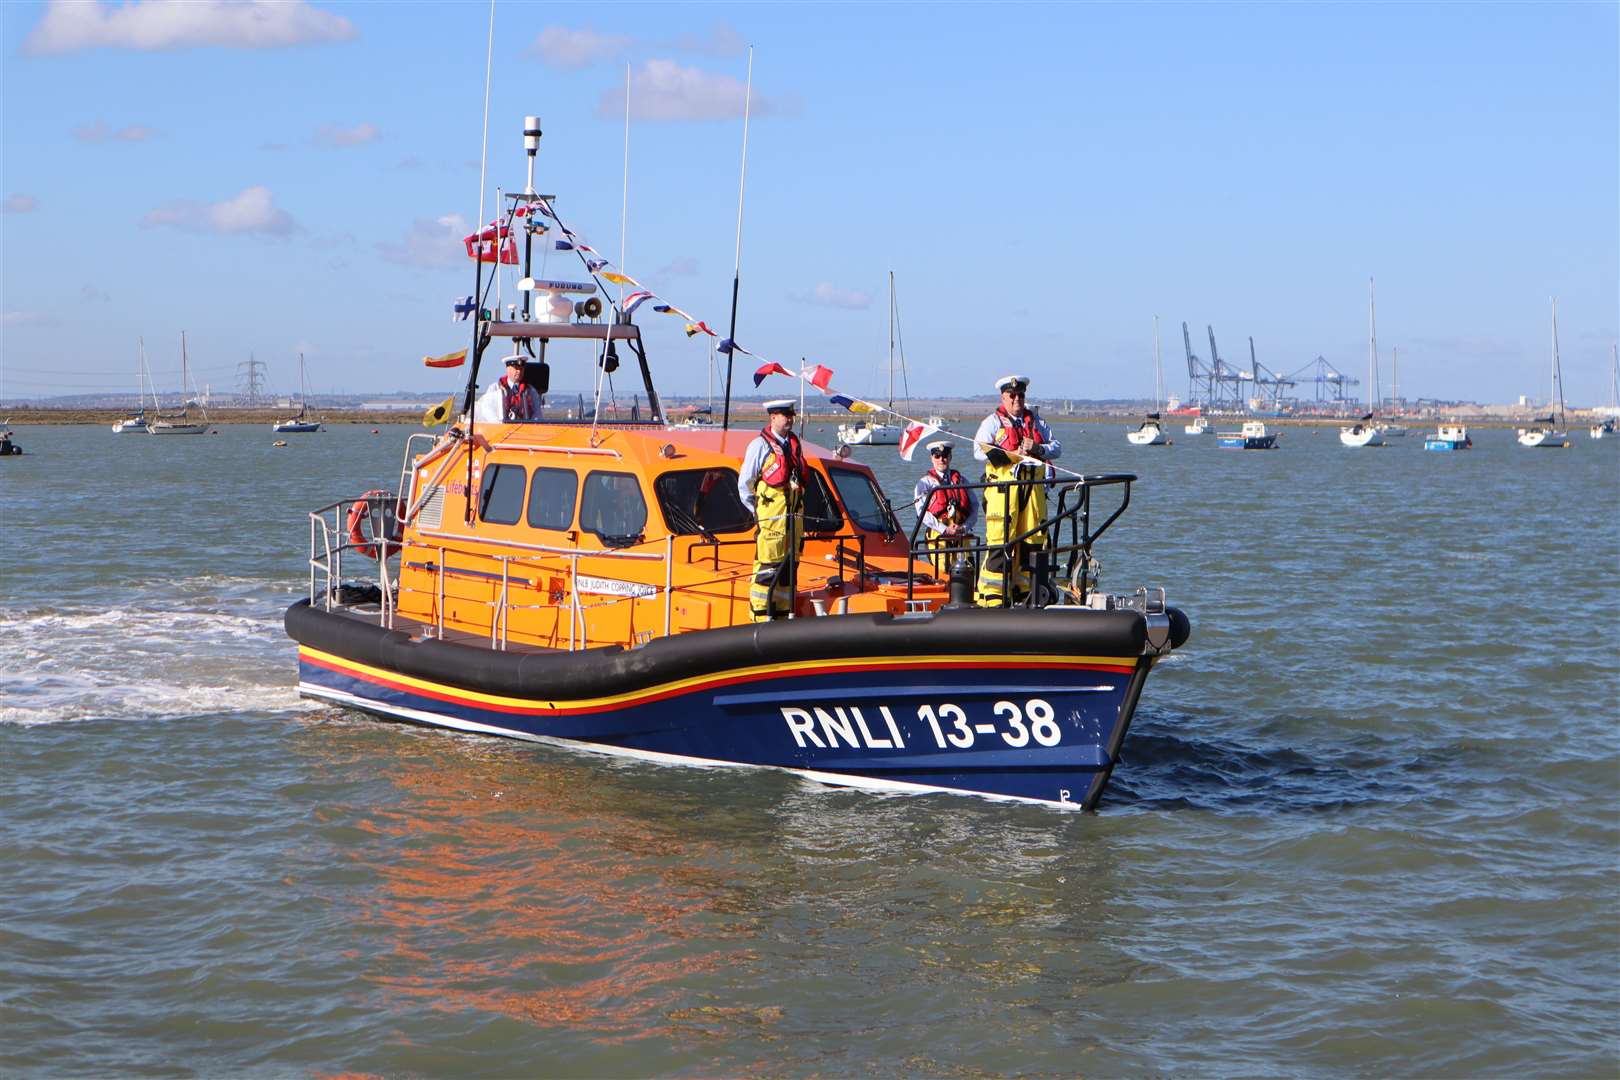 Sheppey's new RNLI lifeboat the Judith Copping Joyce is brought ashore in a ceremony at Crundall's Wharf, Queenborough, on Saturday